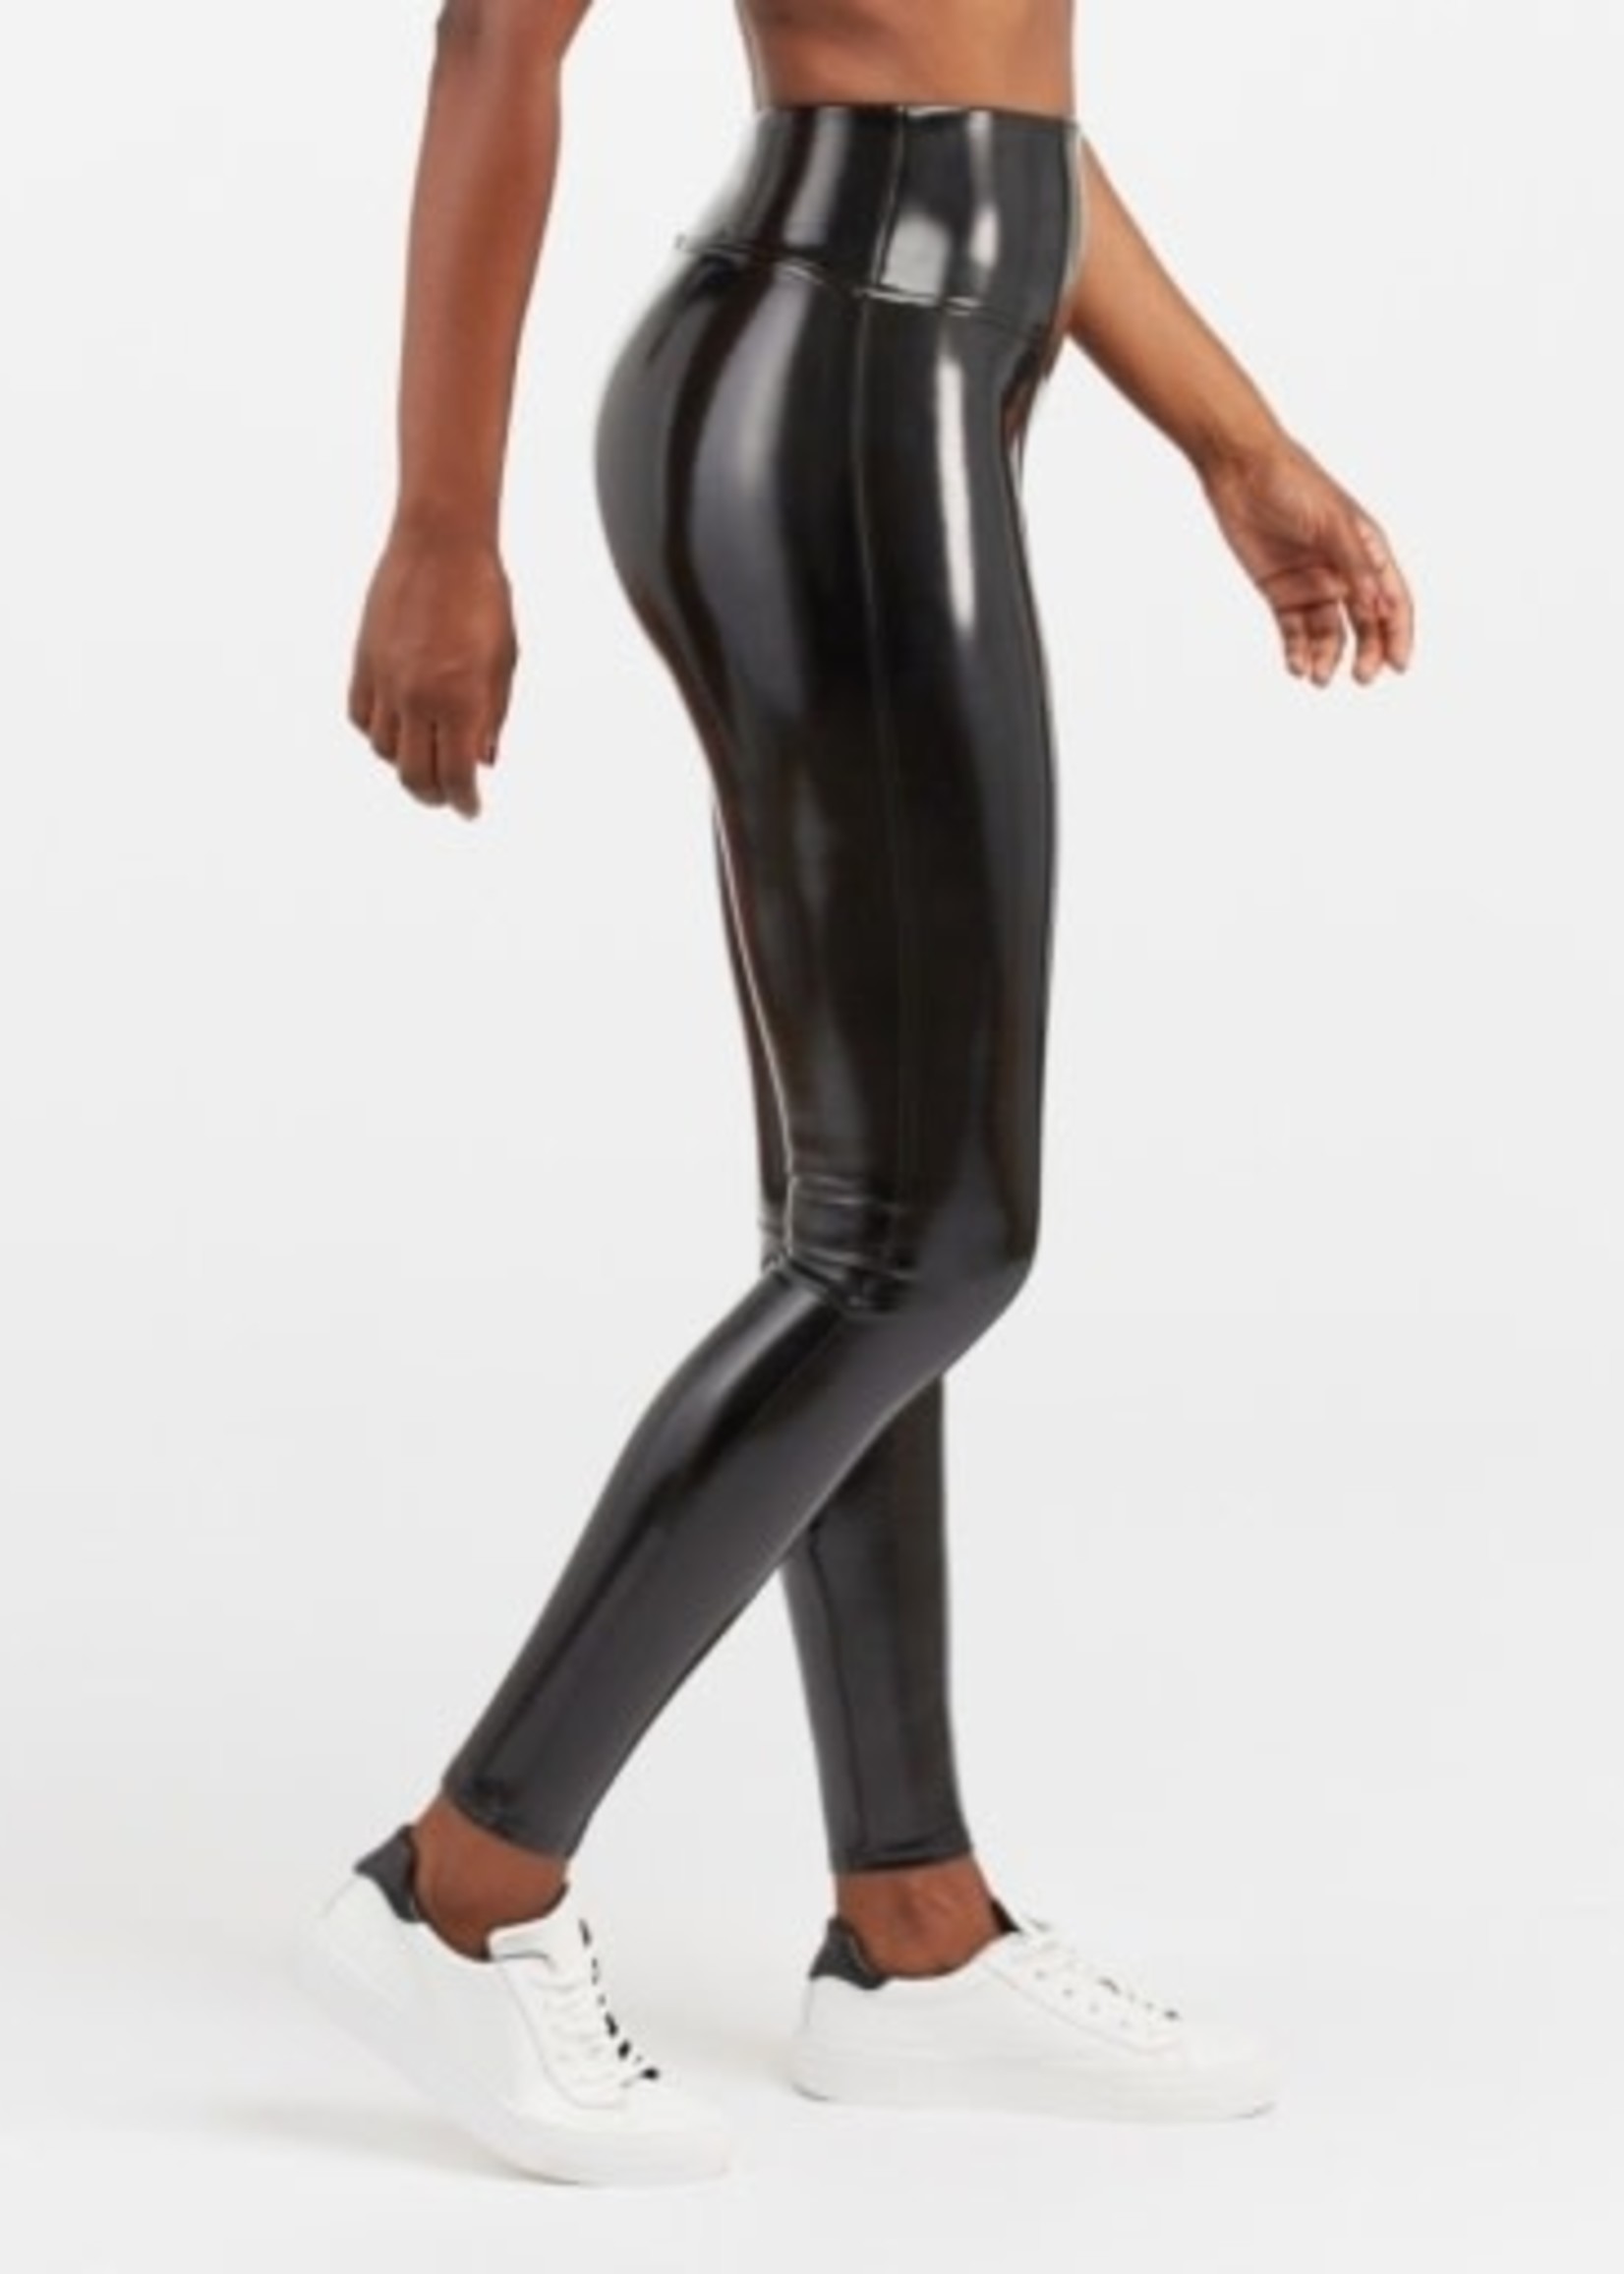 Exotic Faux Leather Spanx Patent Leather Leggings With Open Crotch For Plus  Size Women Perfect For Nightclubs And Fetish Play From Kong01, $16.46